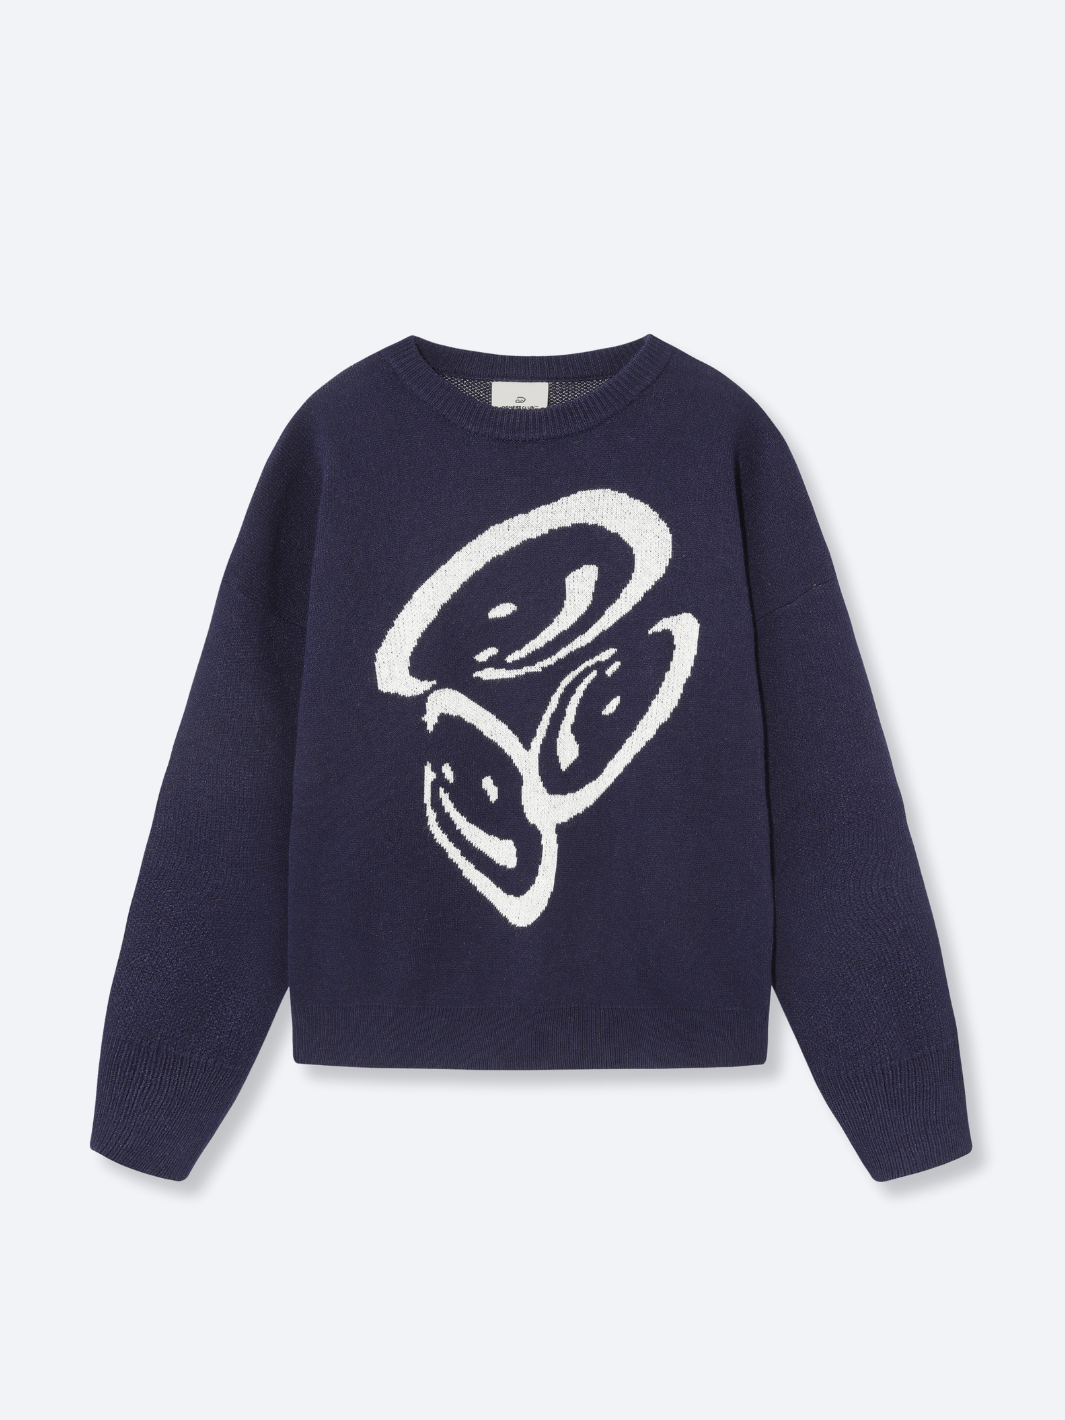 FREEFALL SMILEY KNIT - NAVY BLUE